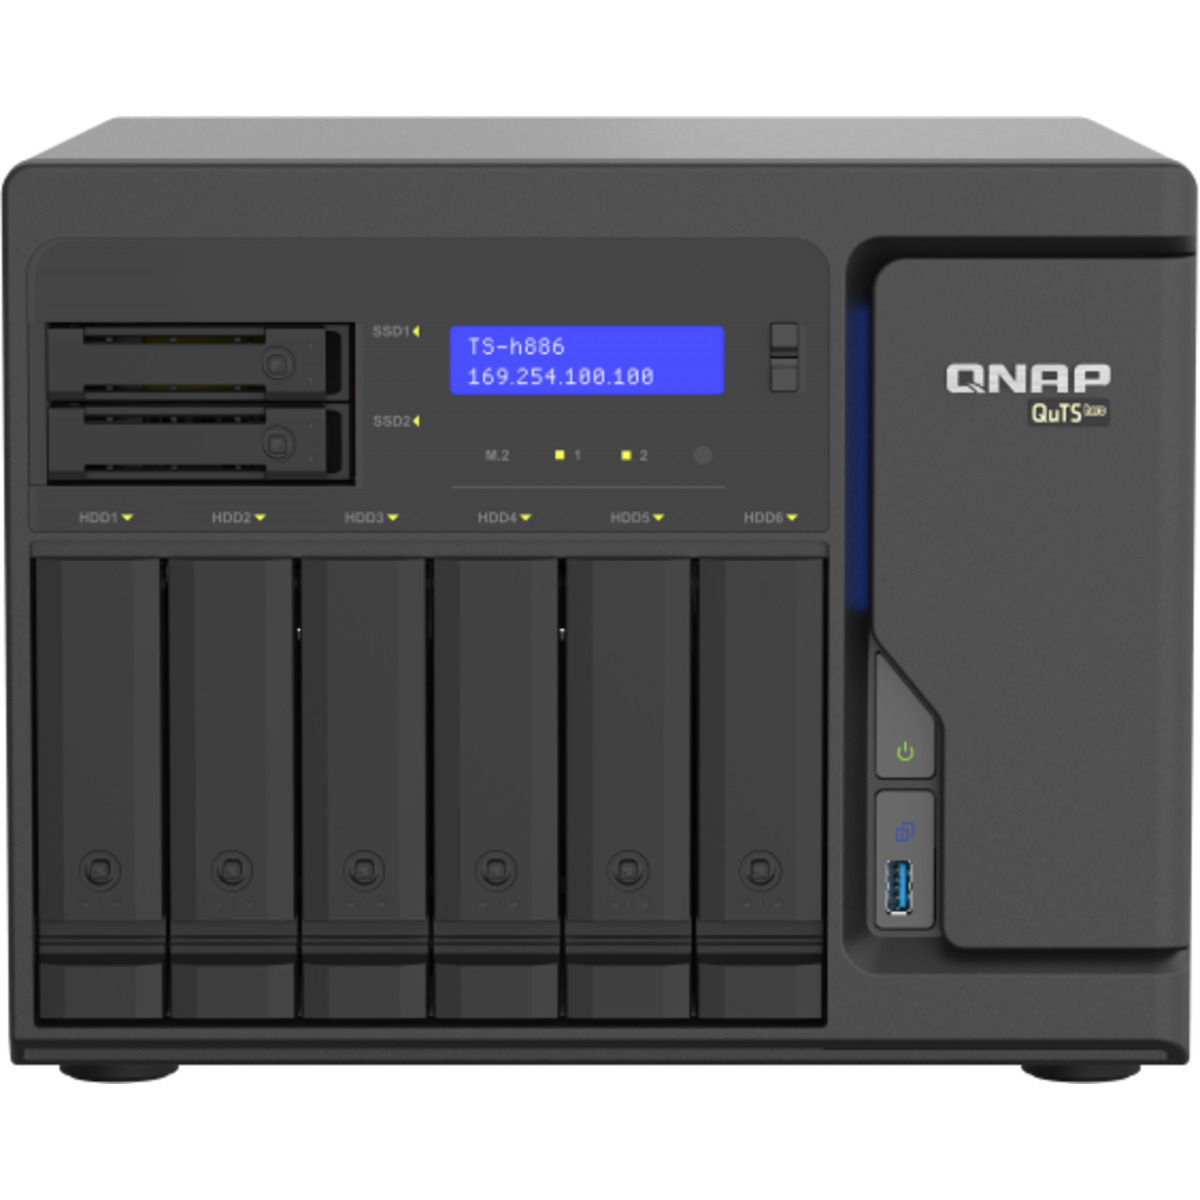 buy $4221 QNAP TS-h886 QuTS hero NAS 120tb Desktop NAS - Network Attached Storage Device 6x20000gb Seagate EXOS X20 ST20000NM007D 3.5 7200rpm SATA 6Gb/s HDD ENTERPRISE Class Drives Installed - Burn-In Tested - nas headquarters buy network attached storage server device das new raid-5 free shipping simply usa TS-h886 QuTS hero NAS